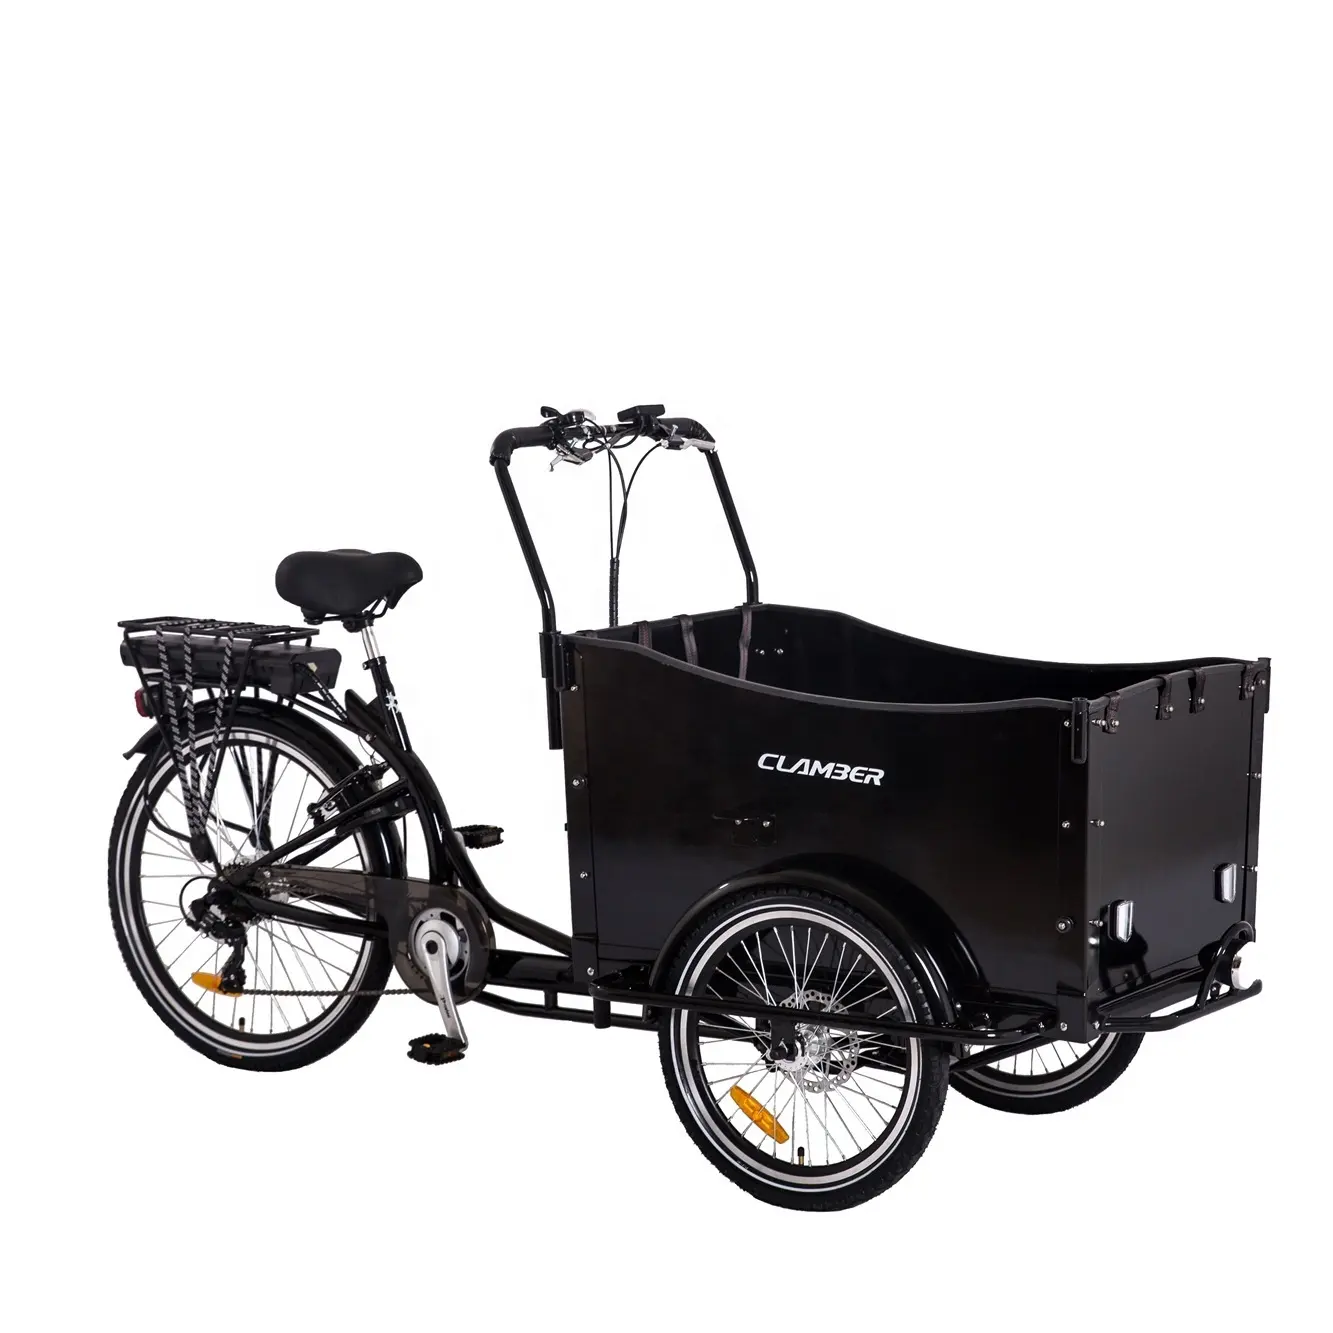 EU China Warehouse Stock Family Three Wheels Electric Cargo Bike Bicycle Electric Tricycle